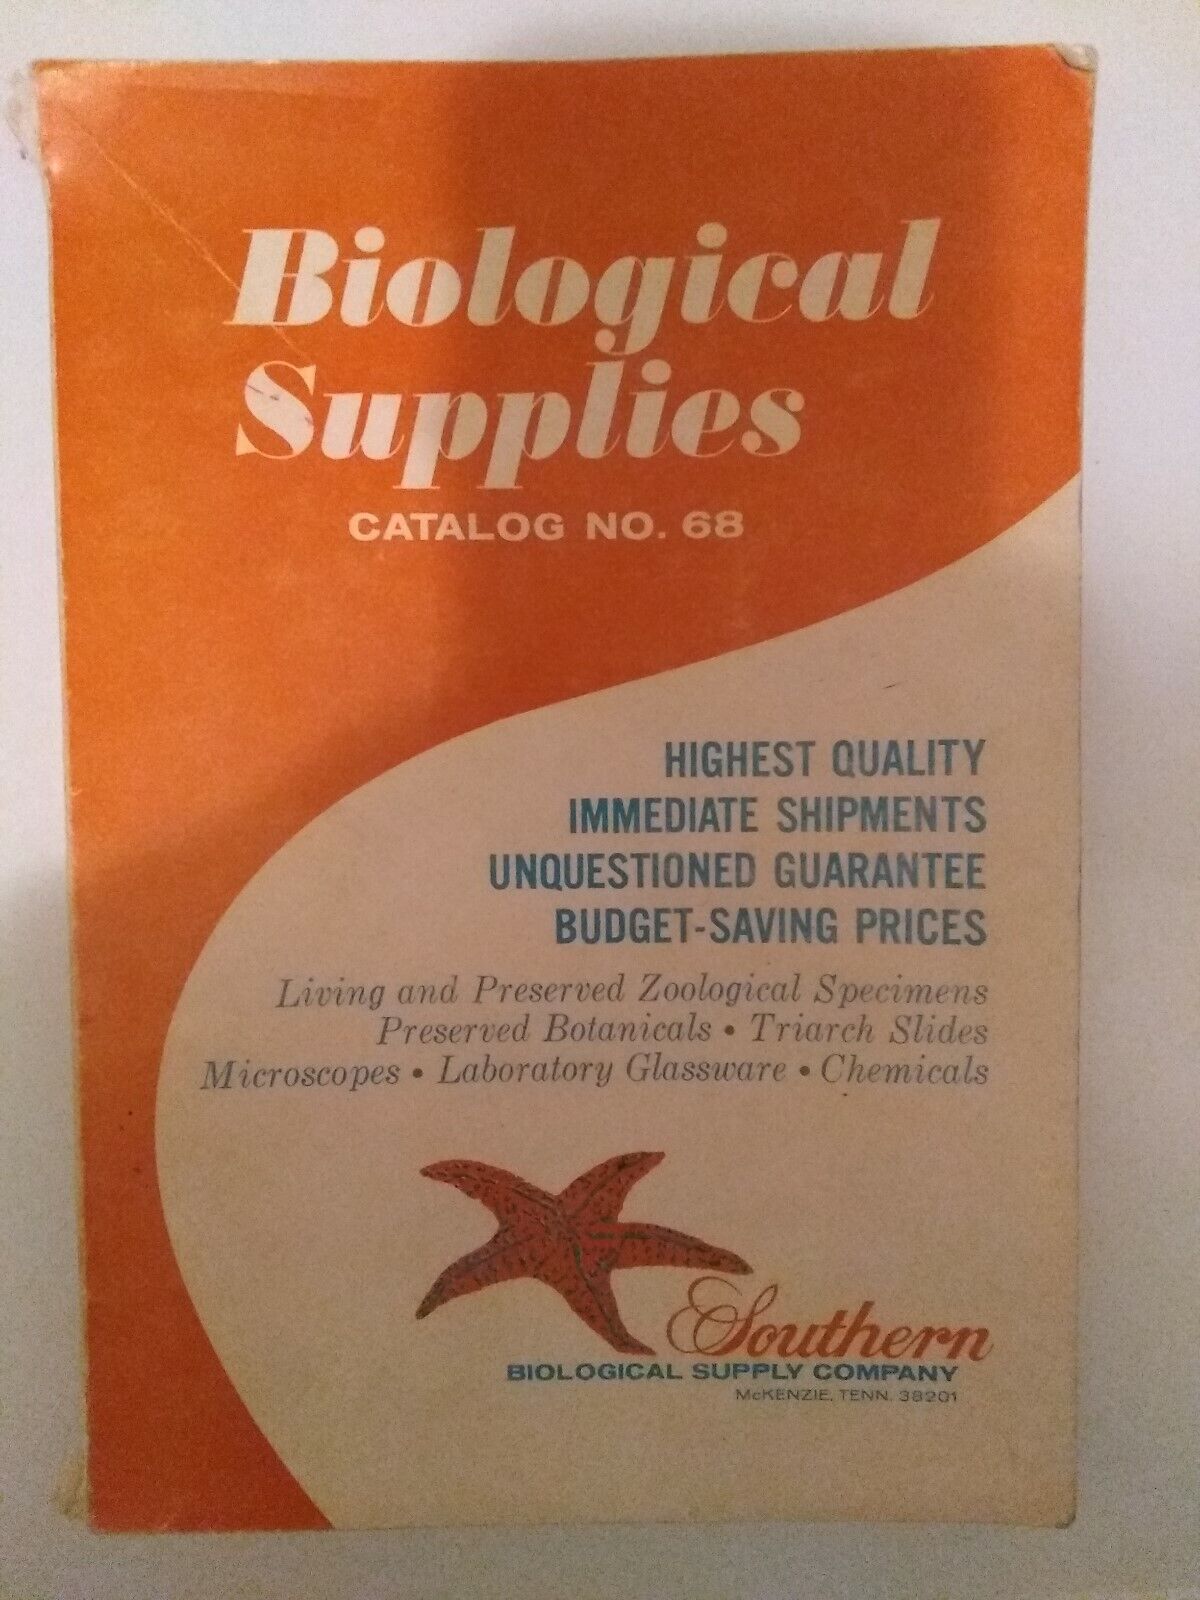 Southern Biological Supply Company: Biological Supplies: Catalog No. 68